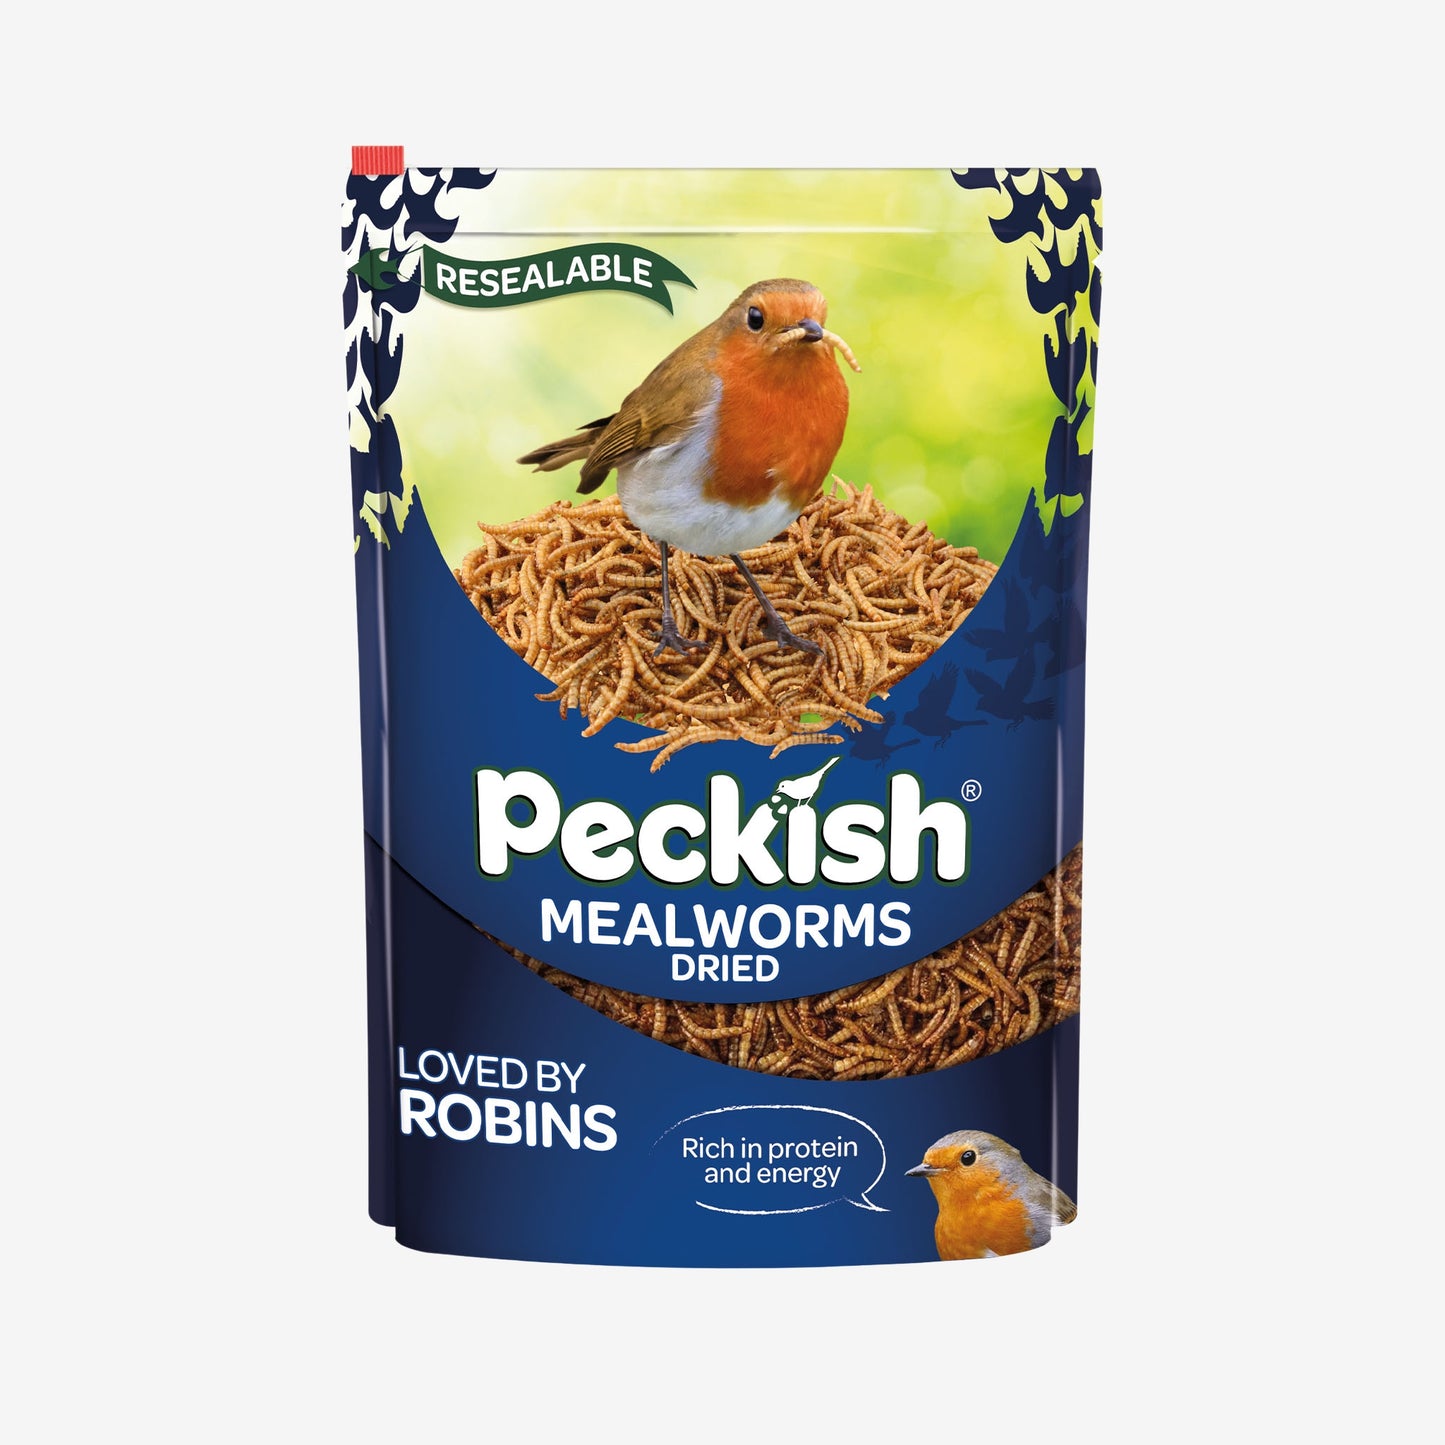 Peckish Mealworms in packaging